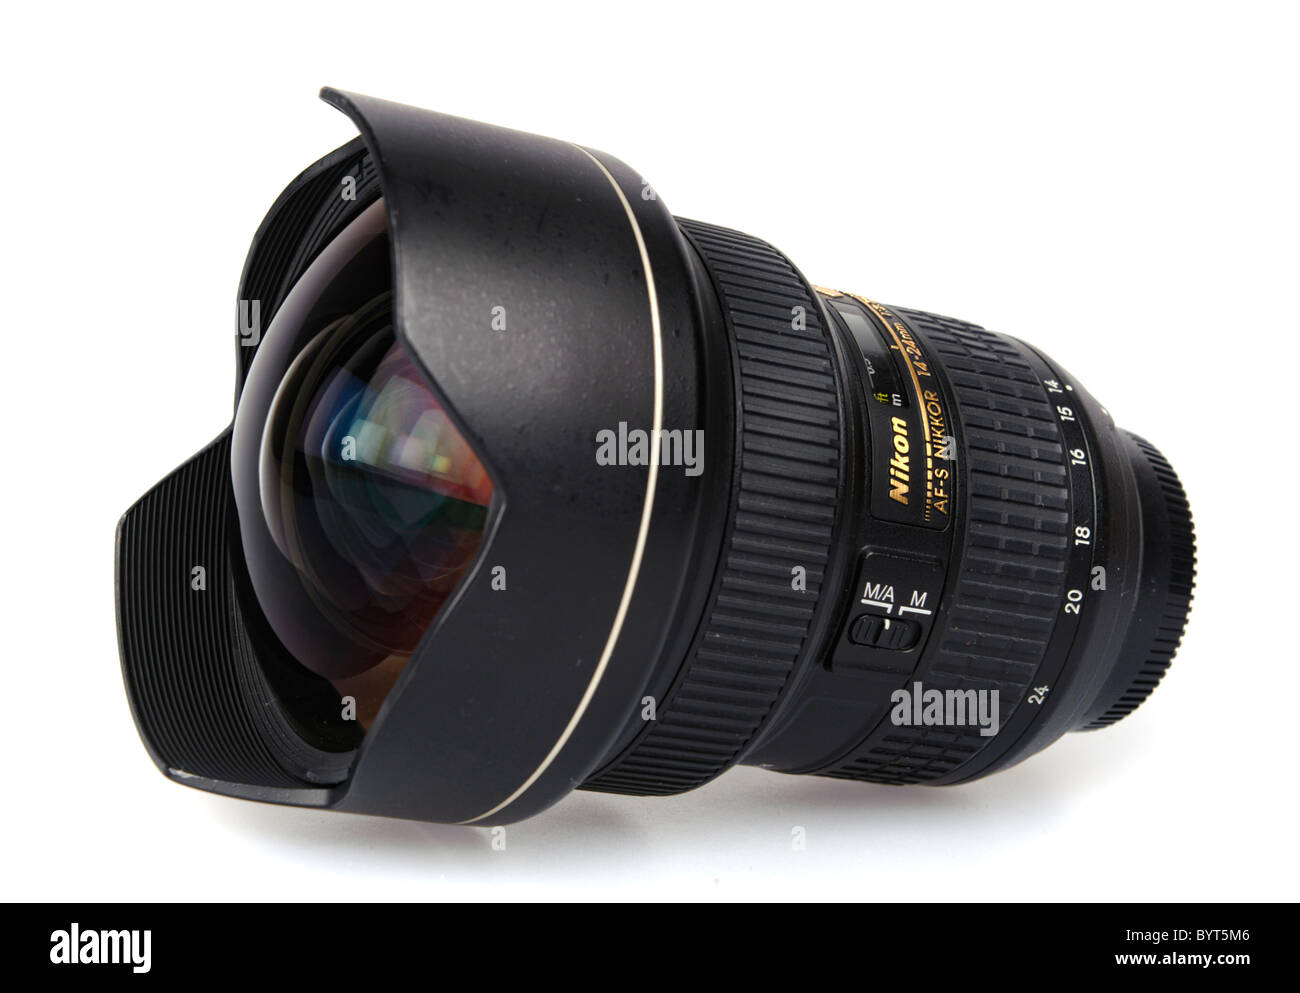 Nikkor 14-24mm f/2.8 ultra wide angle lens for Nikon cameras cutout on  white background Stock Photo - Alamy